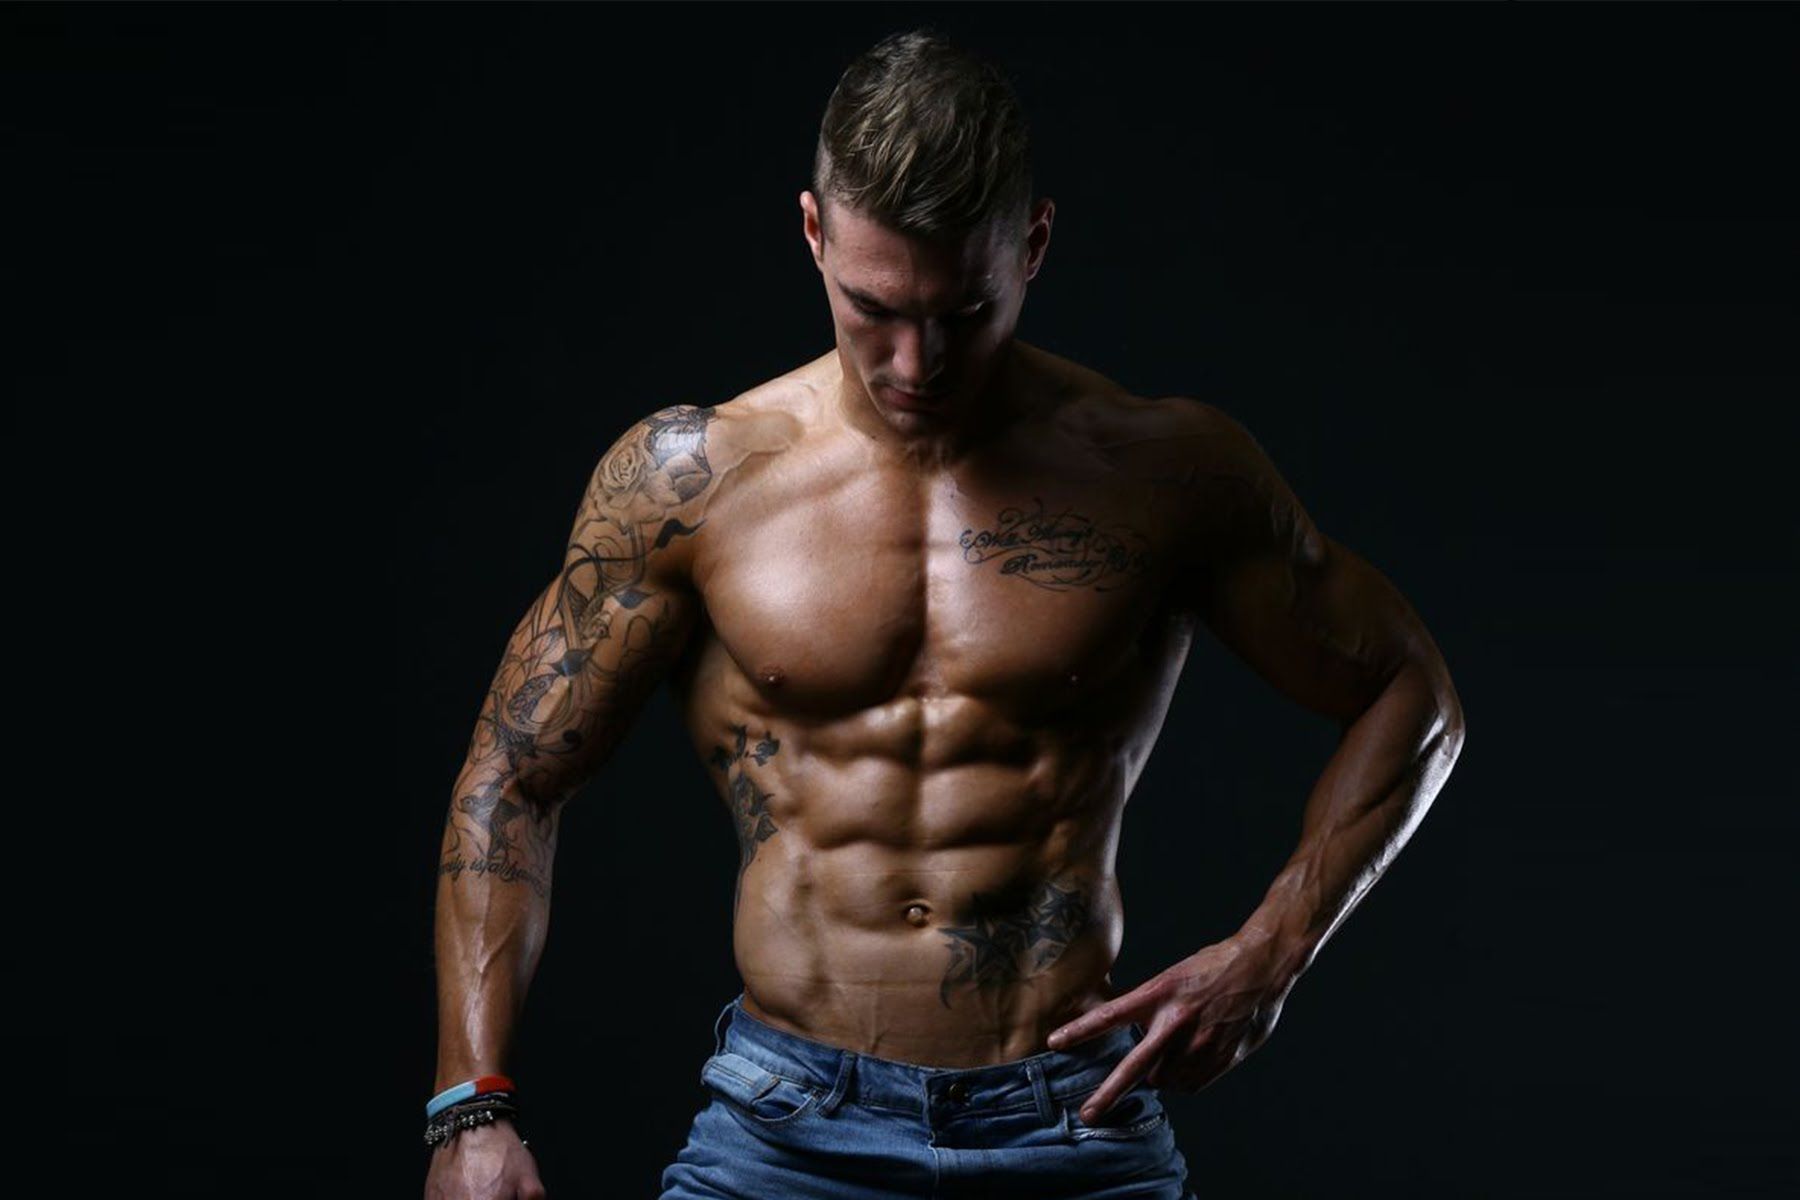 CarlosAlvaDesign. Fit men bodies, Ripped workout, Ripped muscle